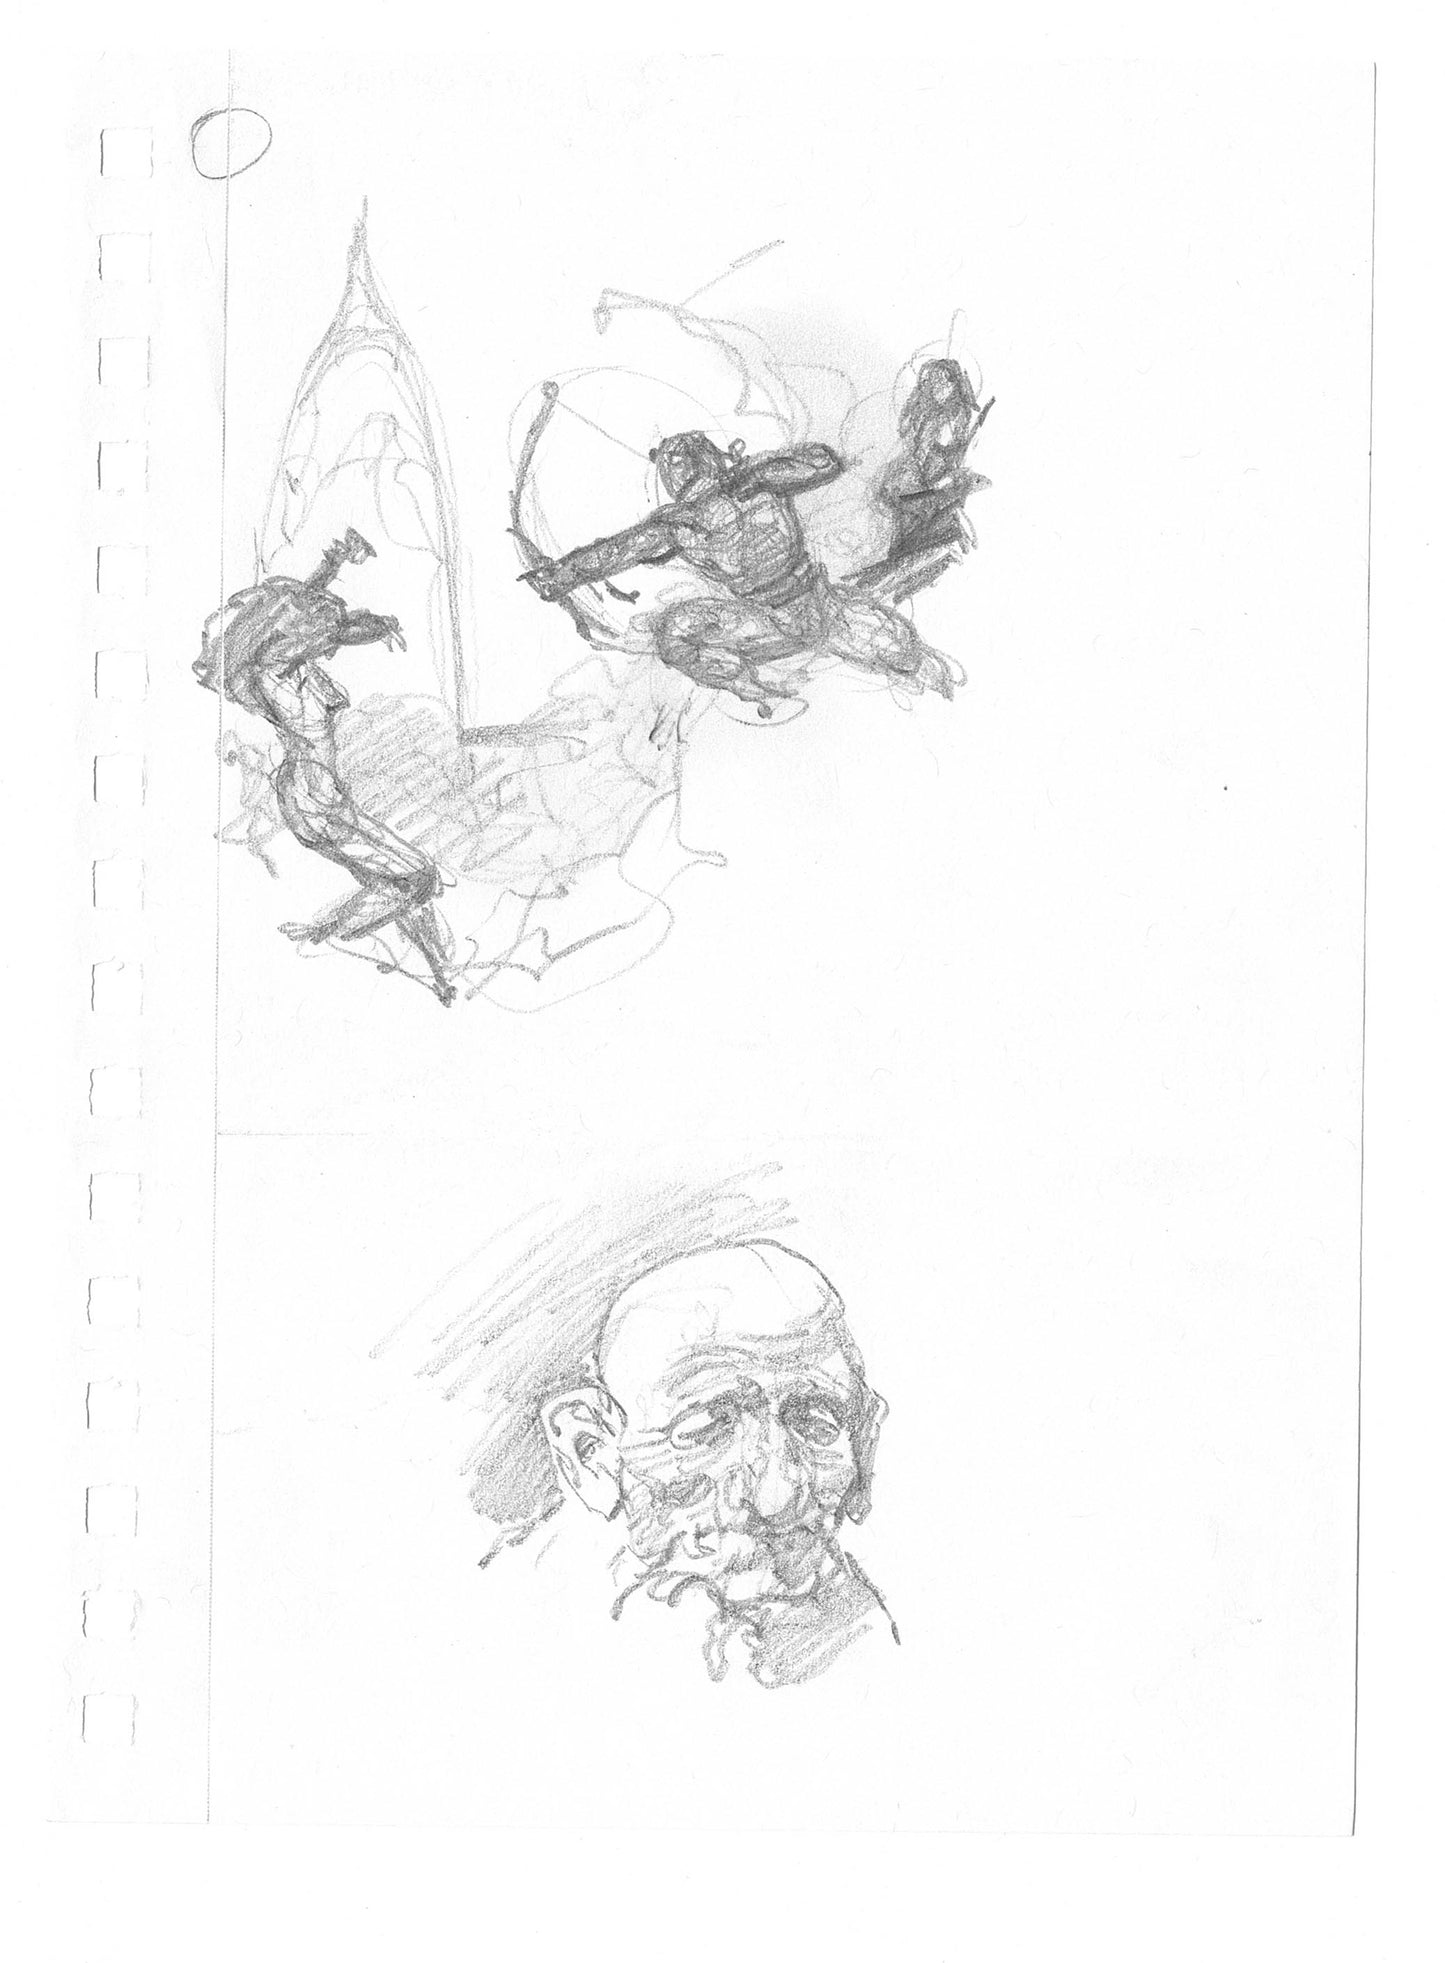 Mike Hoffman Comic Book Artist Personal Original Pencil Art Notebook Page From 2013 B-m17